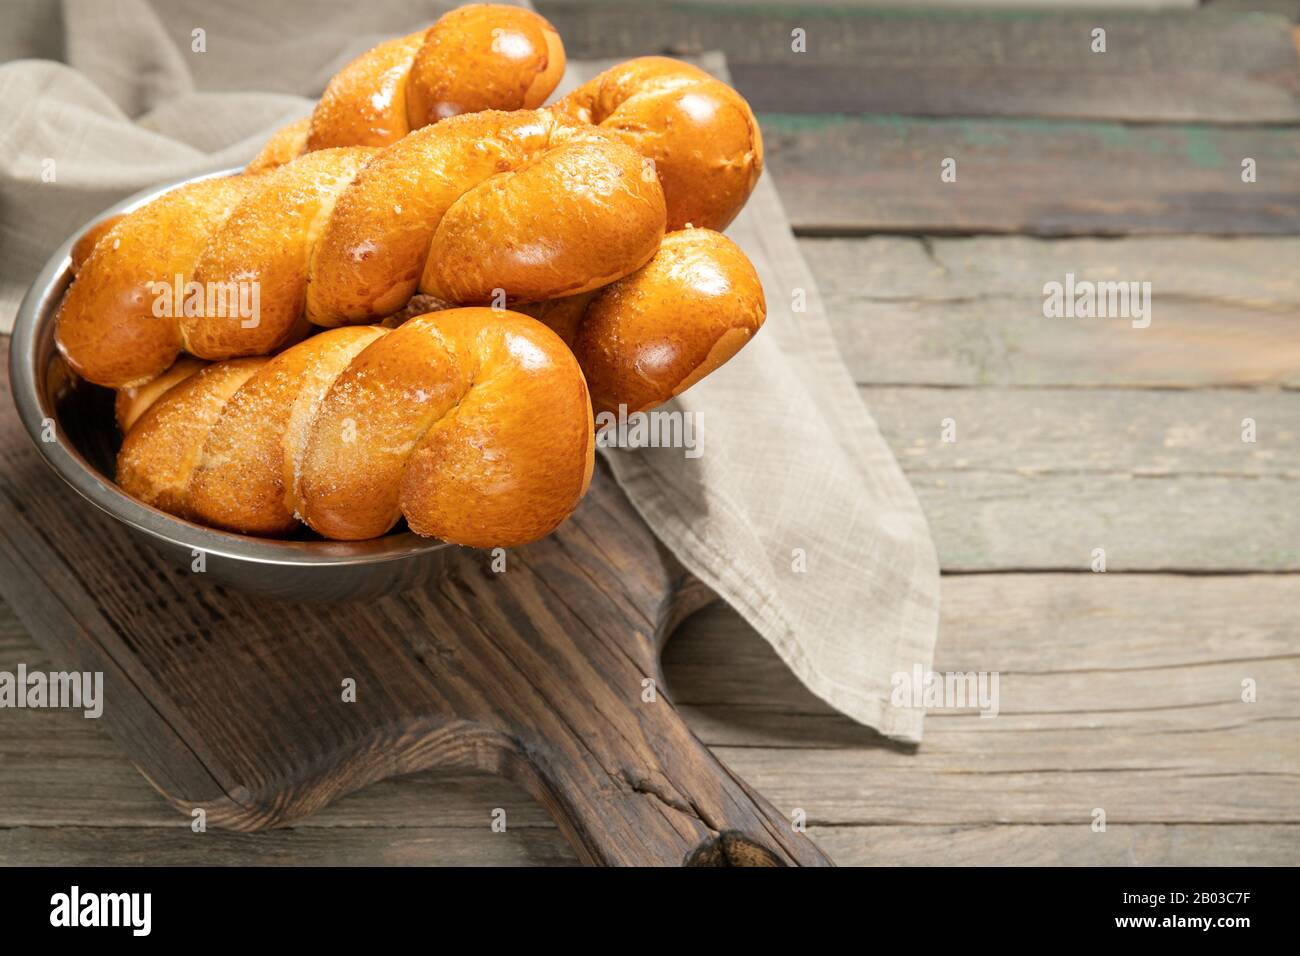 Delicious pastries.Tasty buns.Delicious Pigtail Buns Stock Photo